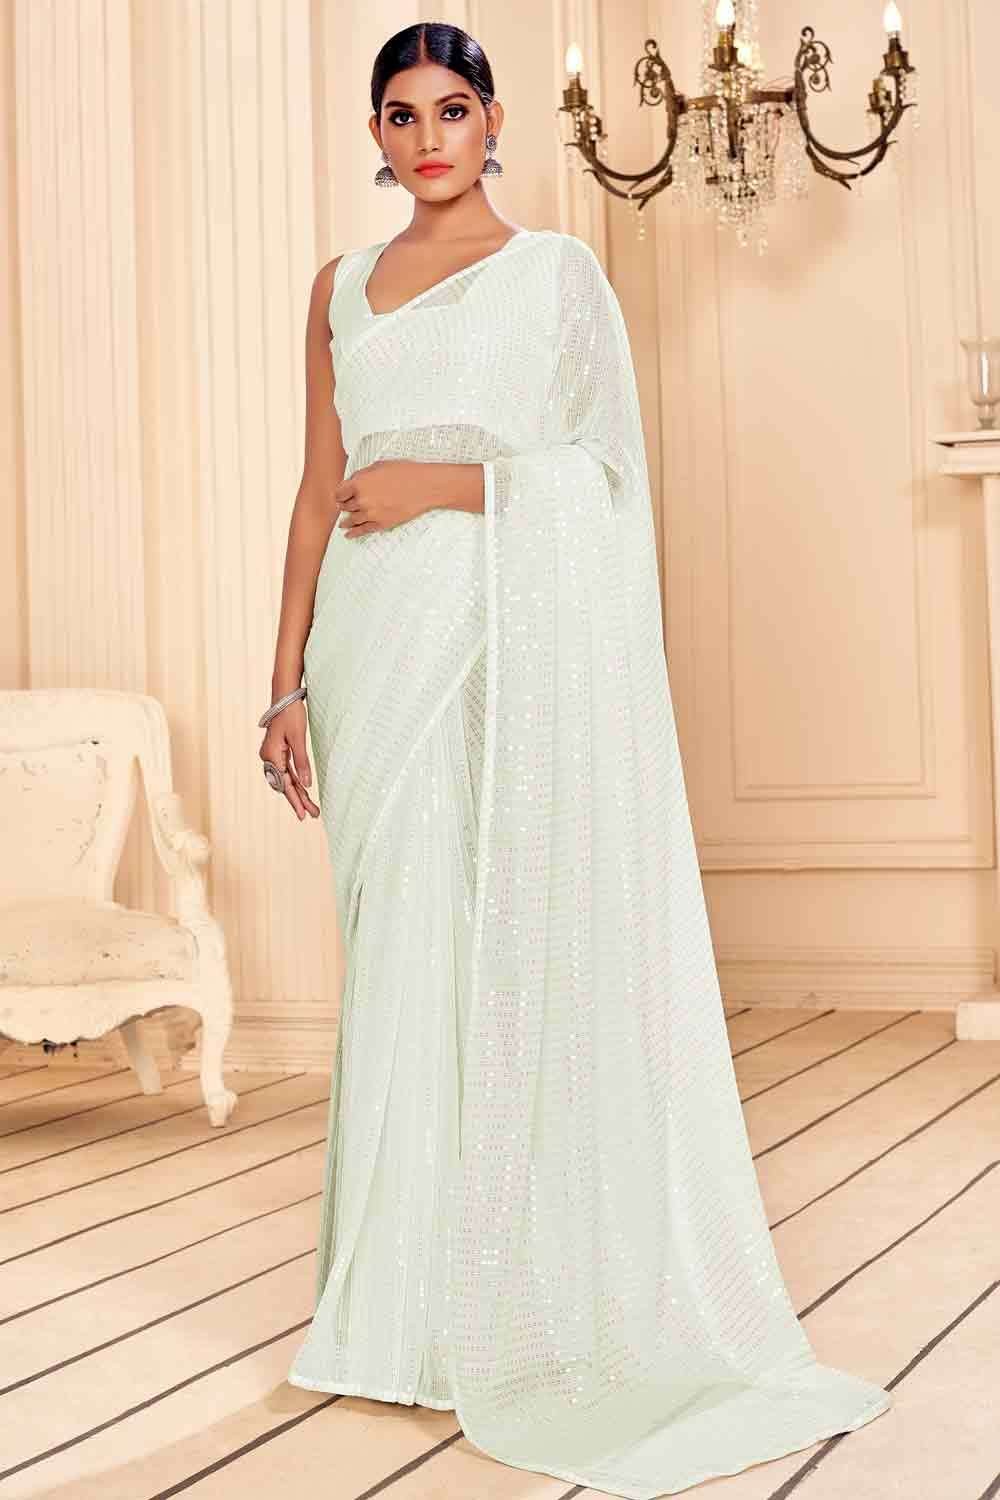 Antique White Georgette Saree With Hand Embroidery | Singhania's